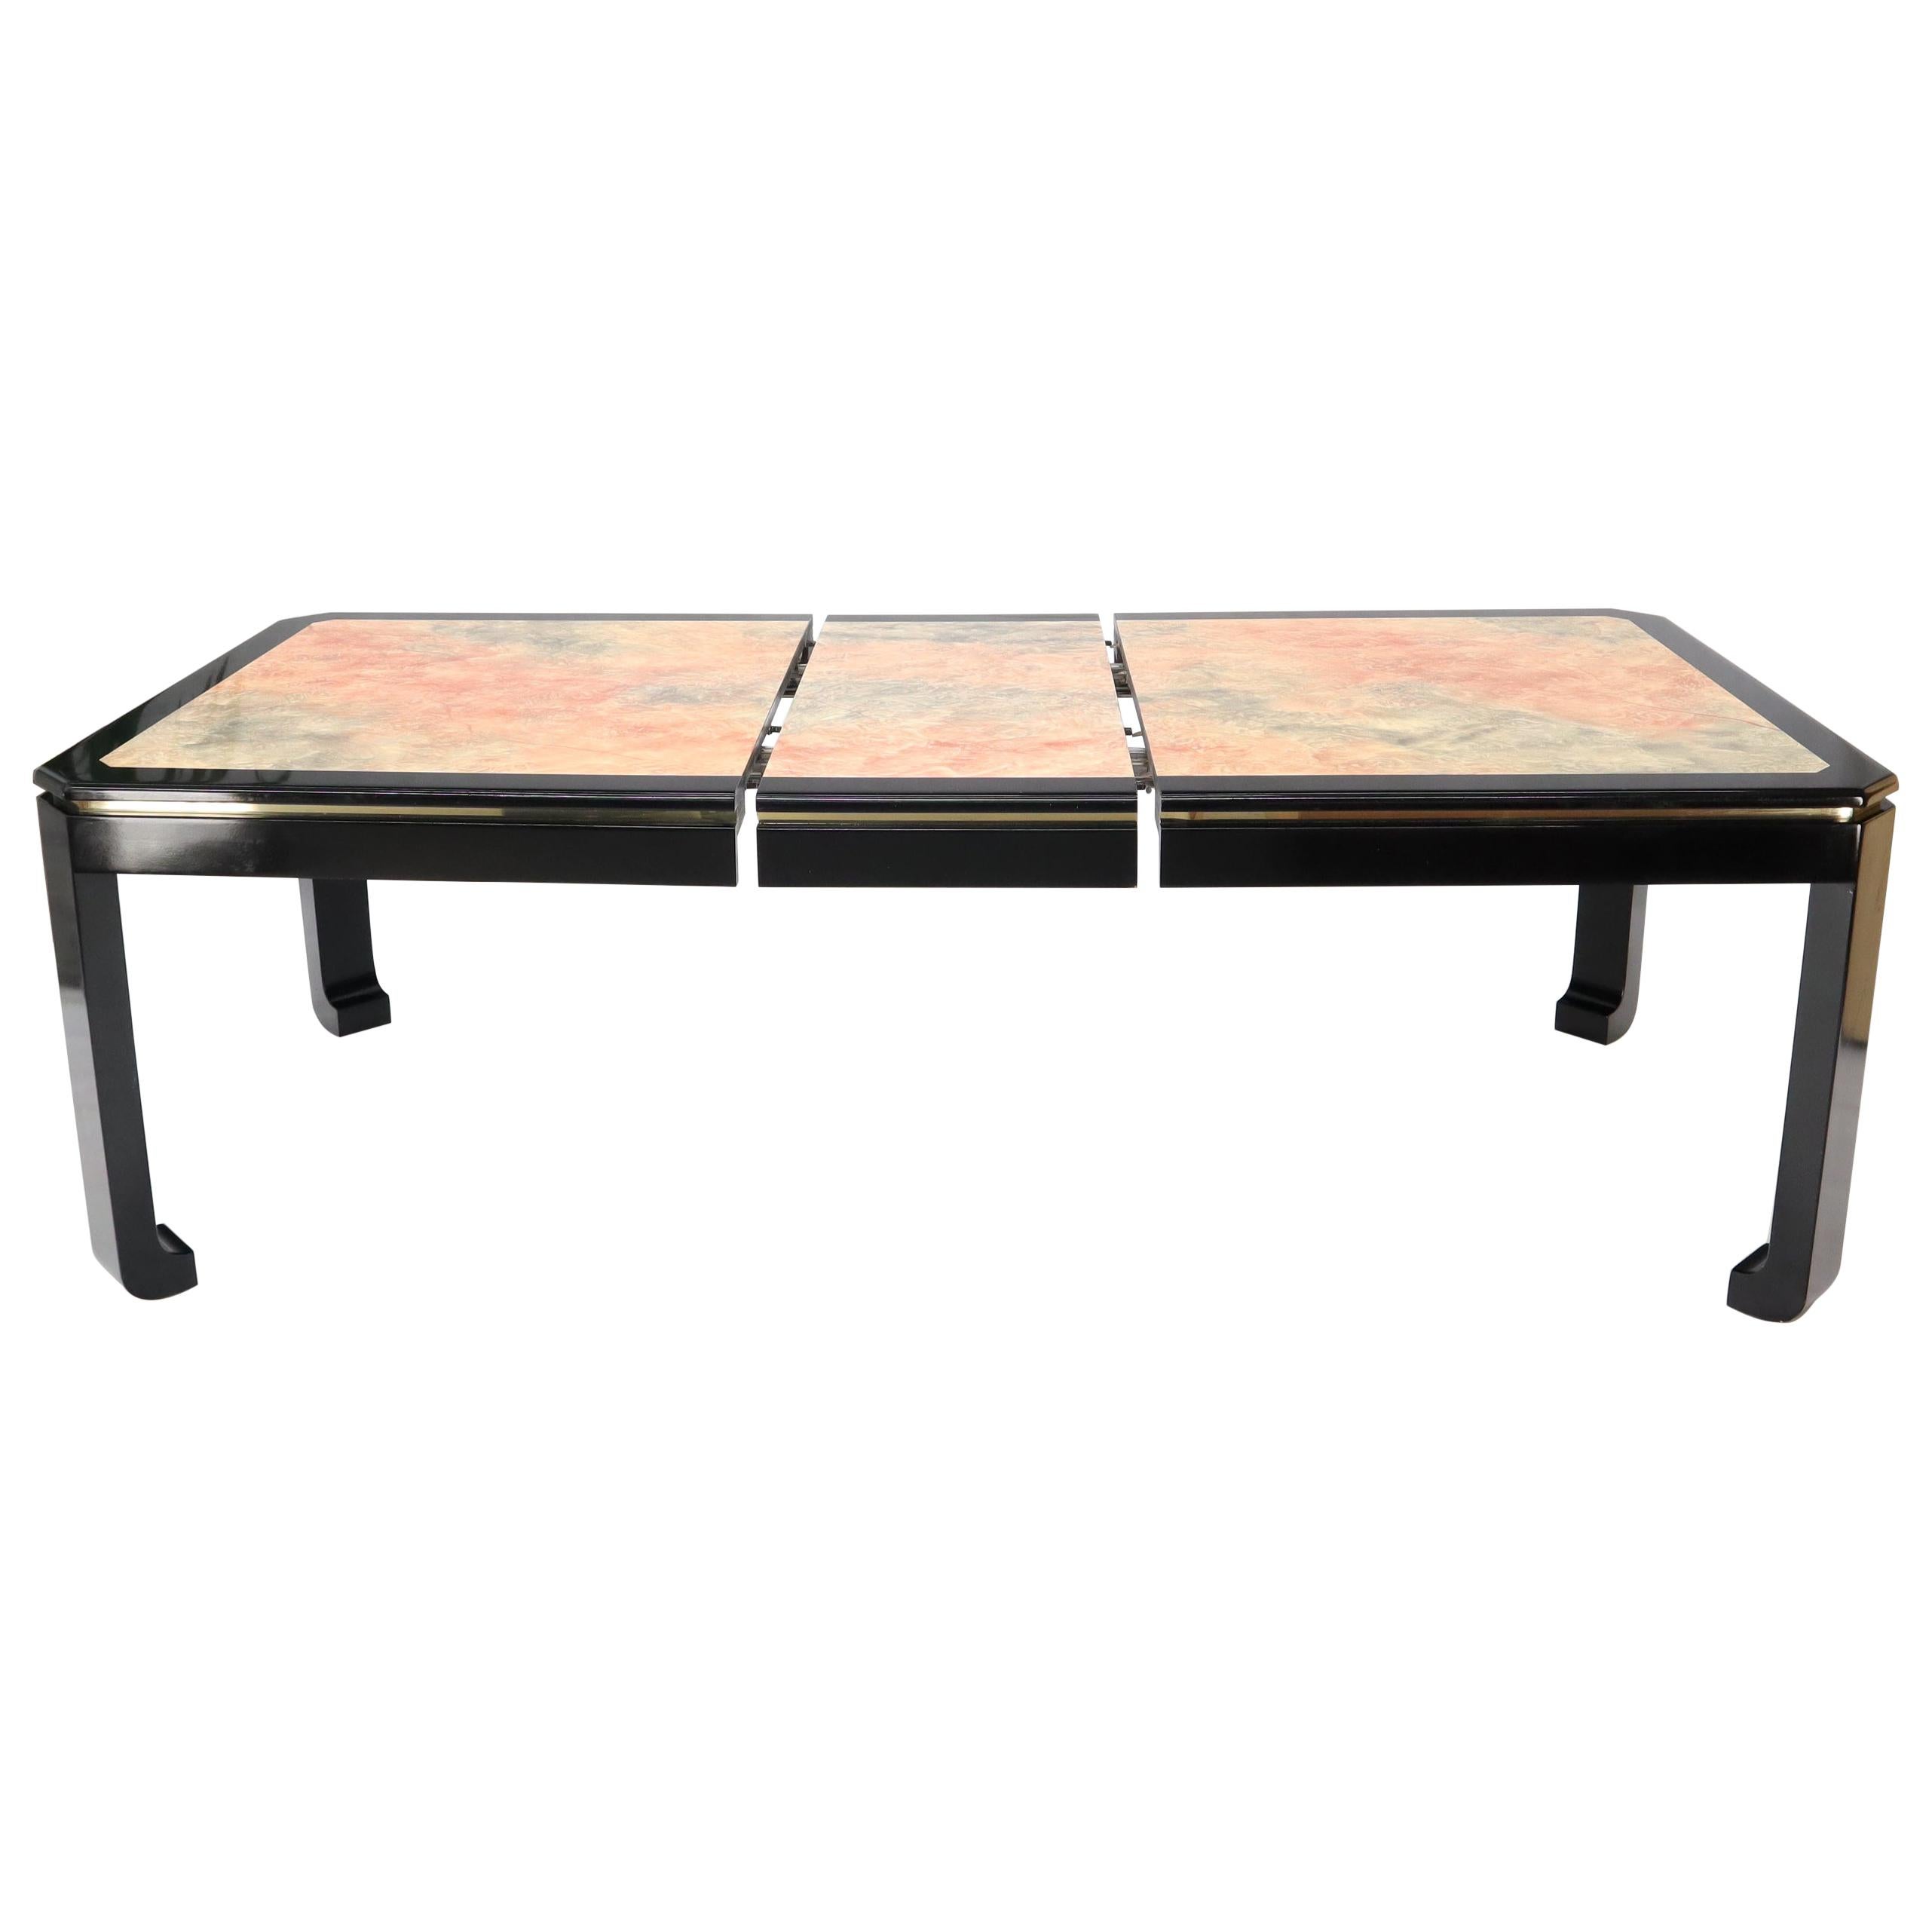 Black Lacquer Faux Stone Marble Finish Dining Table with Leave Extension Board